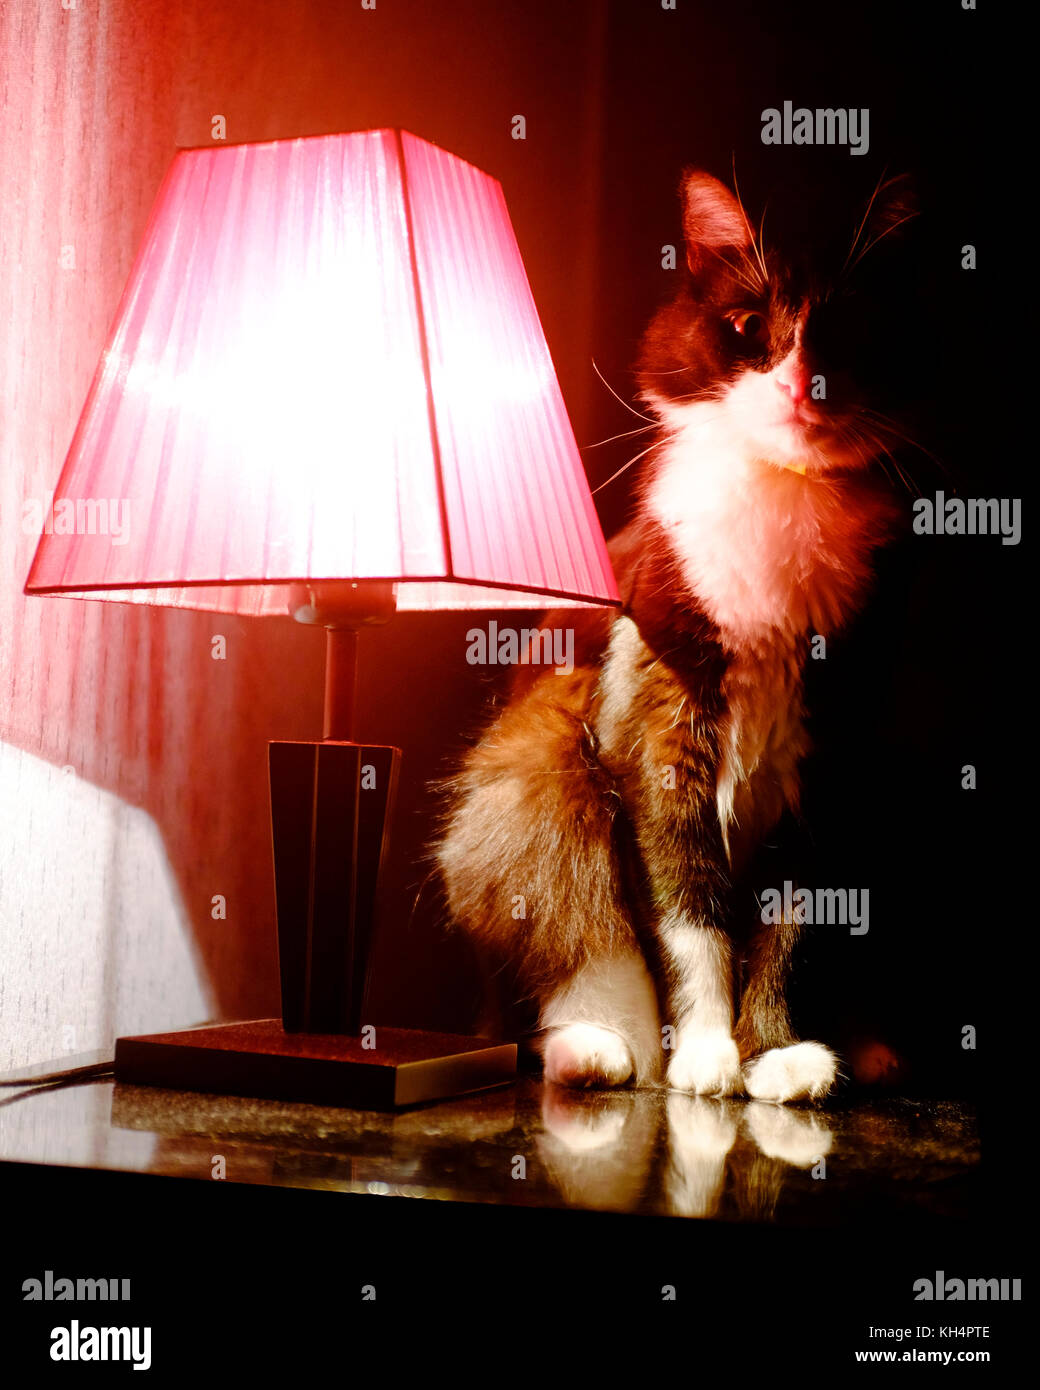 Cat standing near a red lamp Stock Photo